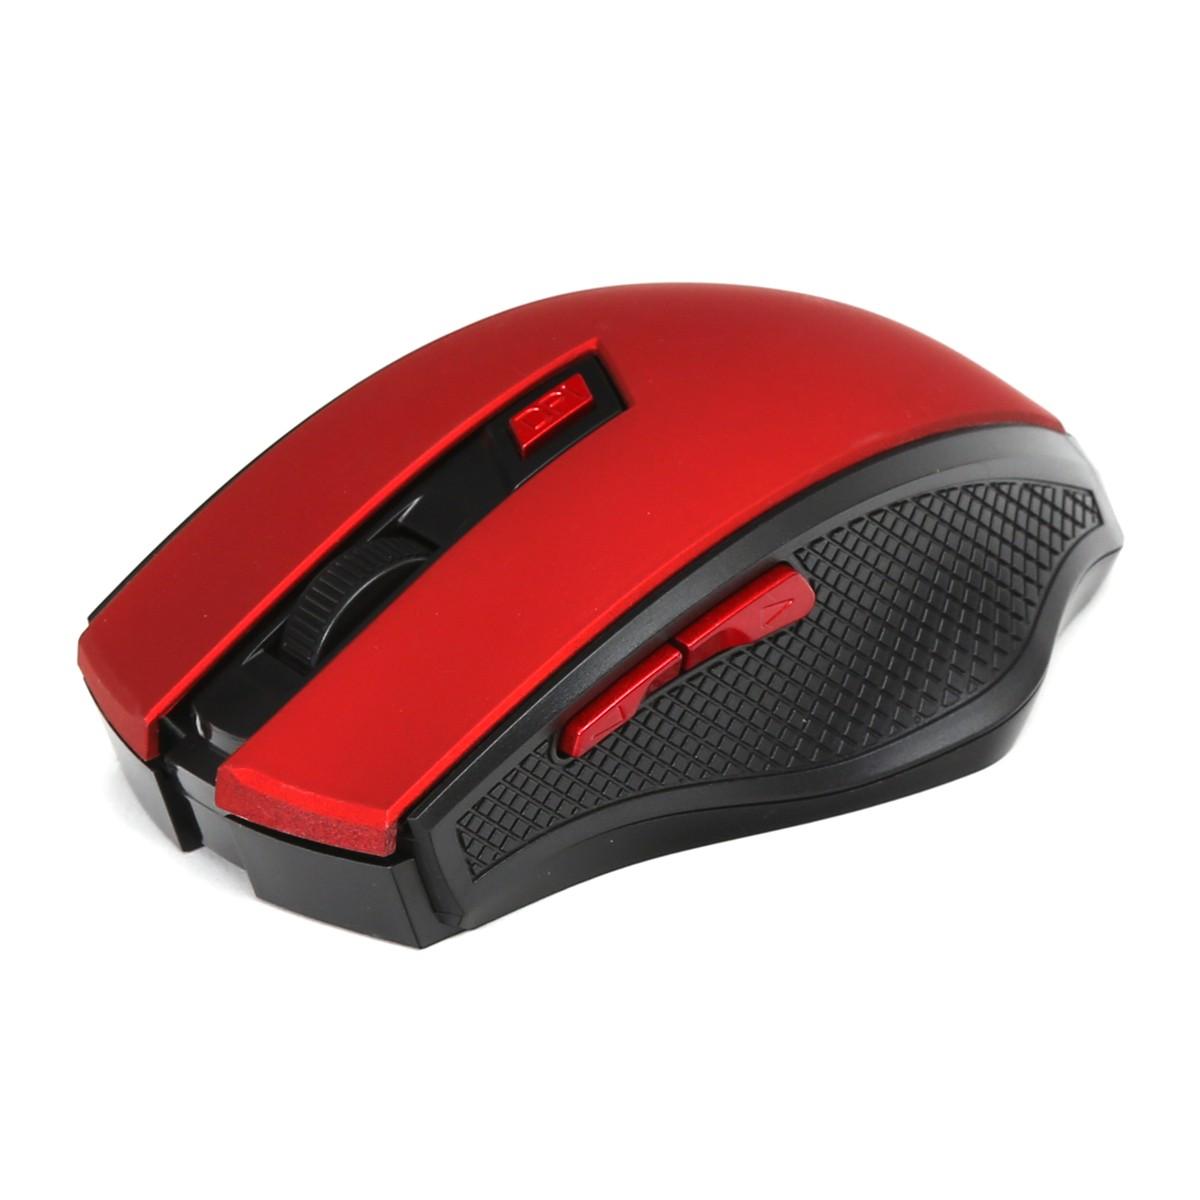 MOUSE OMEGA OM-08WR WIRELESS 2.4 GHz 1000/1200/1600DPI  RED [45525]